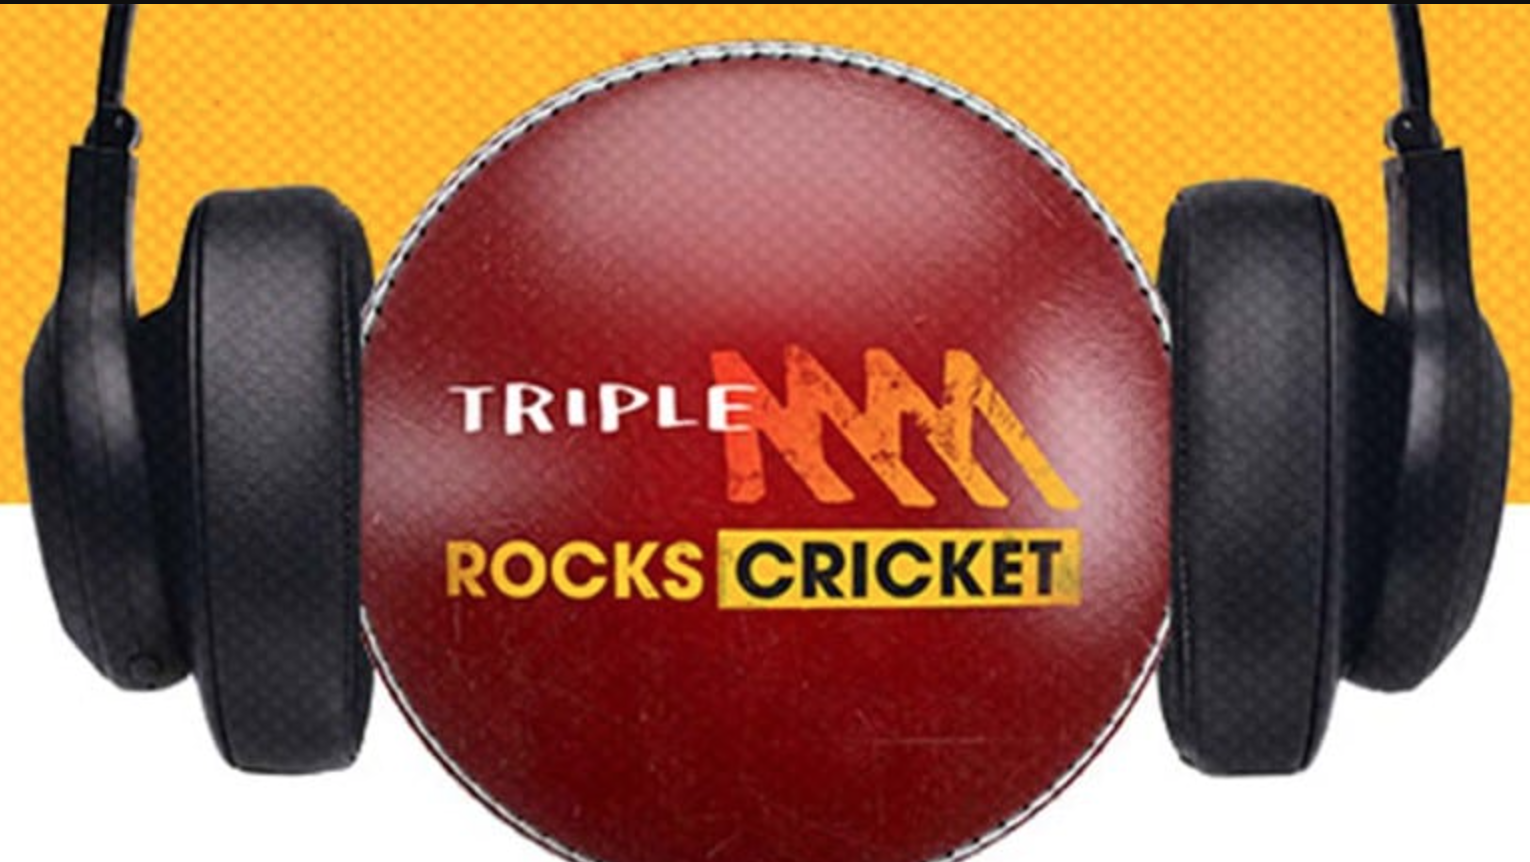 Triple M expands cricket rights in new multi-year deal